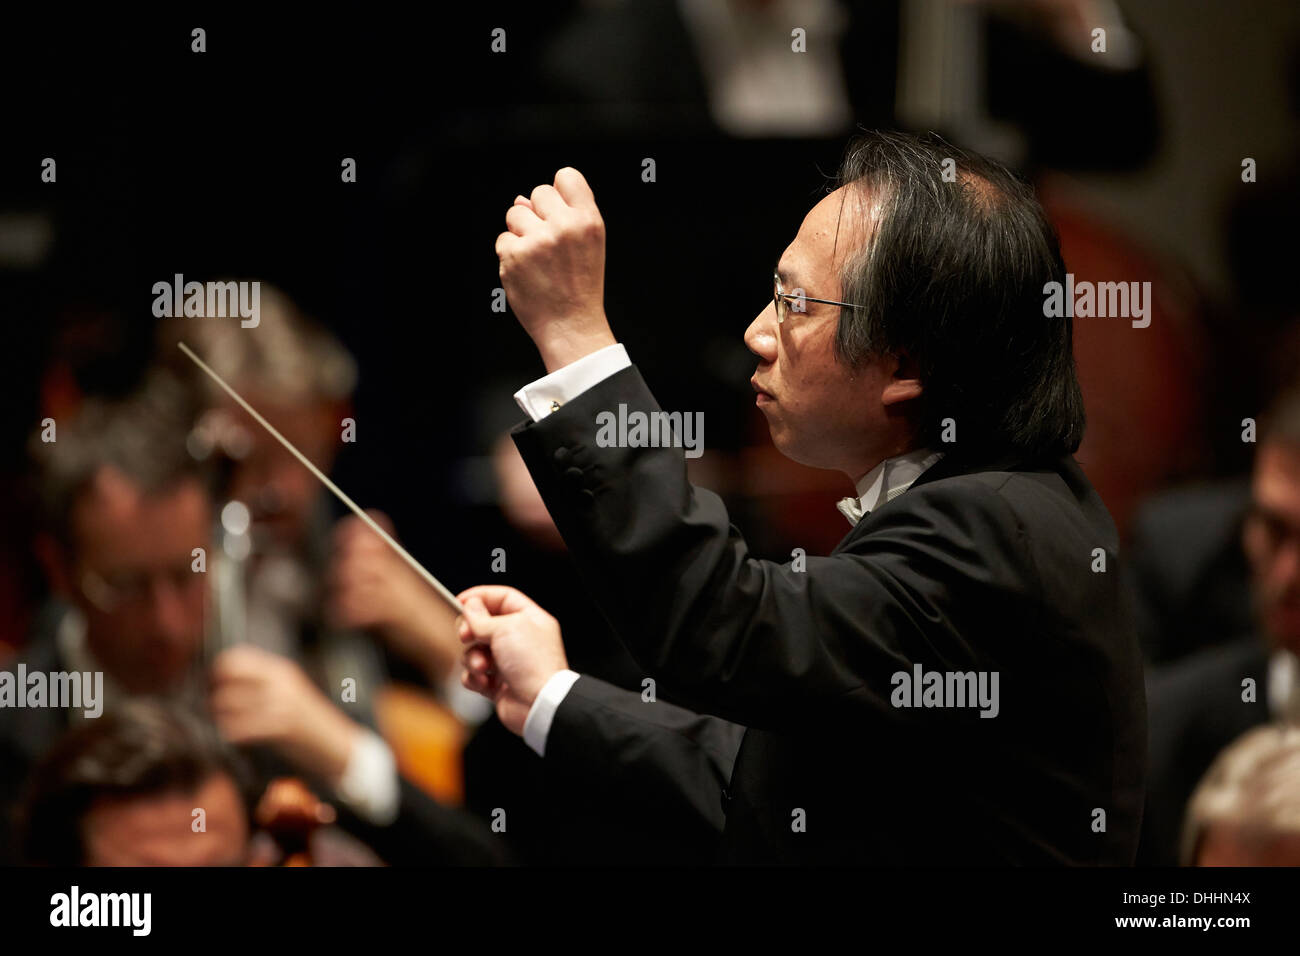 Symphony concert of the Music Institute Koblenz, Beethoven Orchestra Bonn, conducted by Shao-Chia Lue, Koblenz Stock Photo